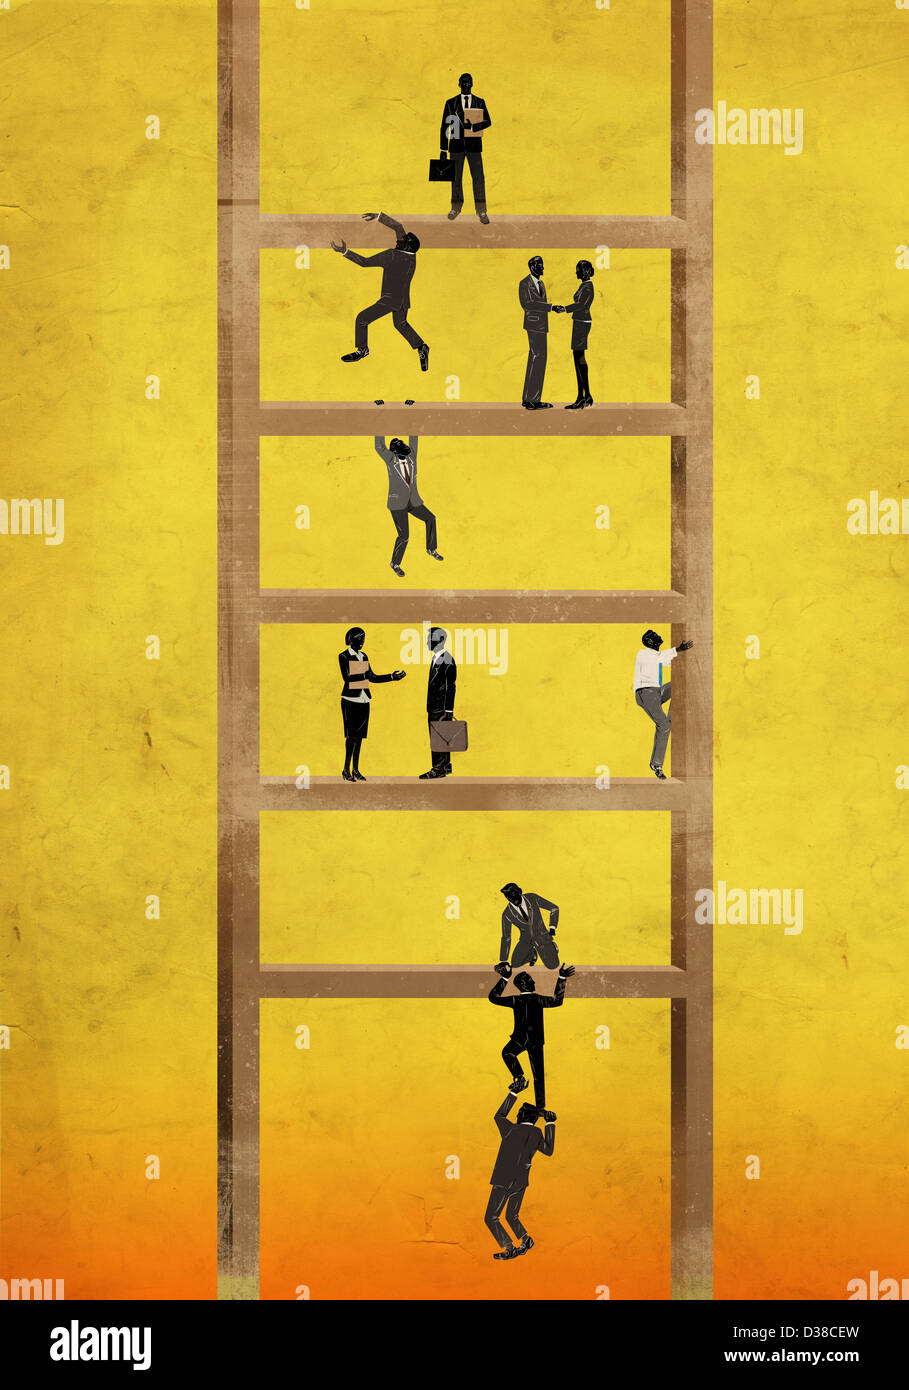 Illustrative image of business people on ladder representing hierarchy Stock Photo